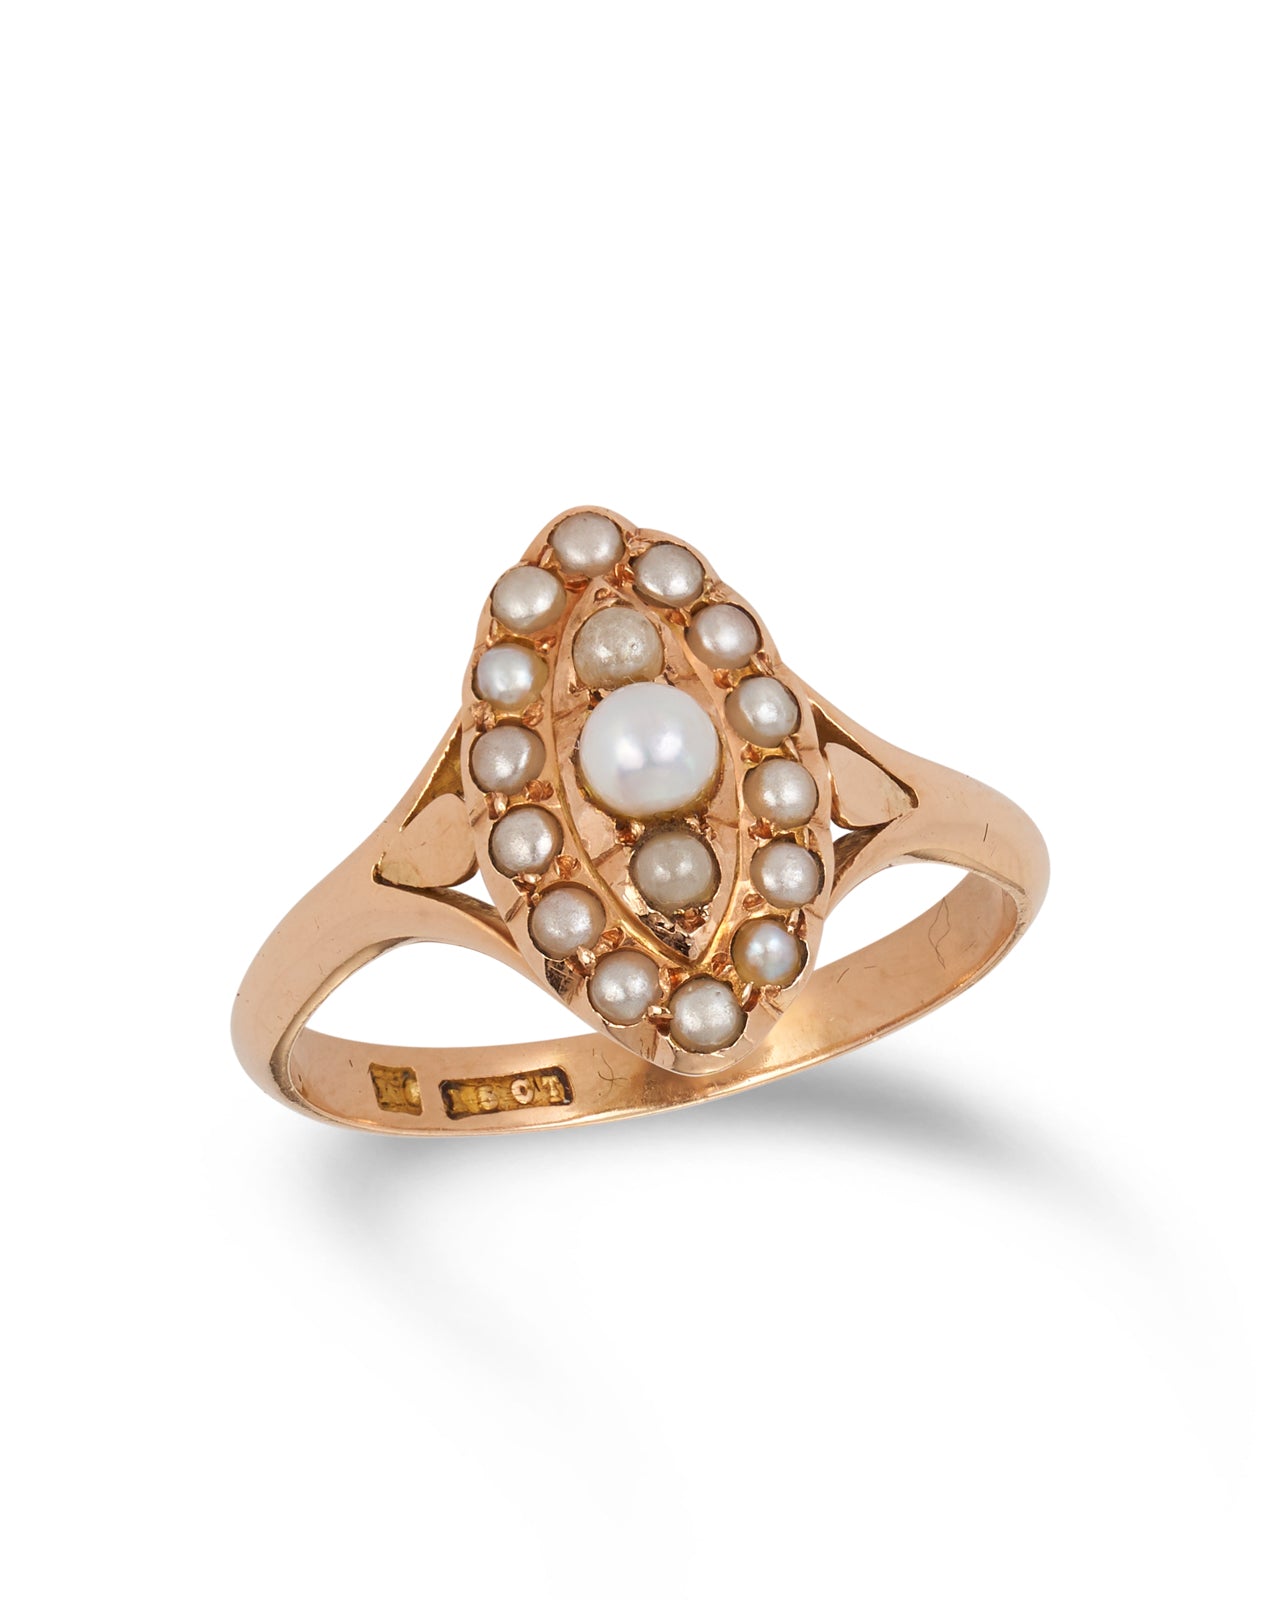 Antique Australian Seed Pearl Ring